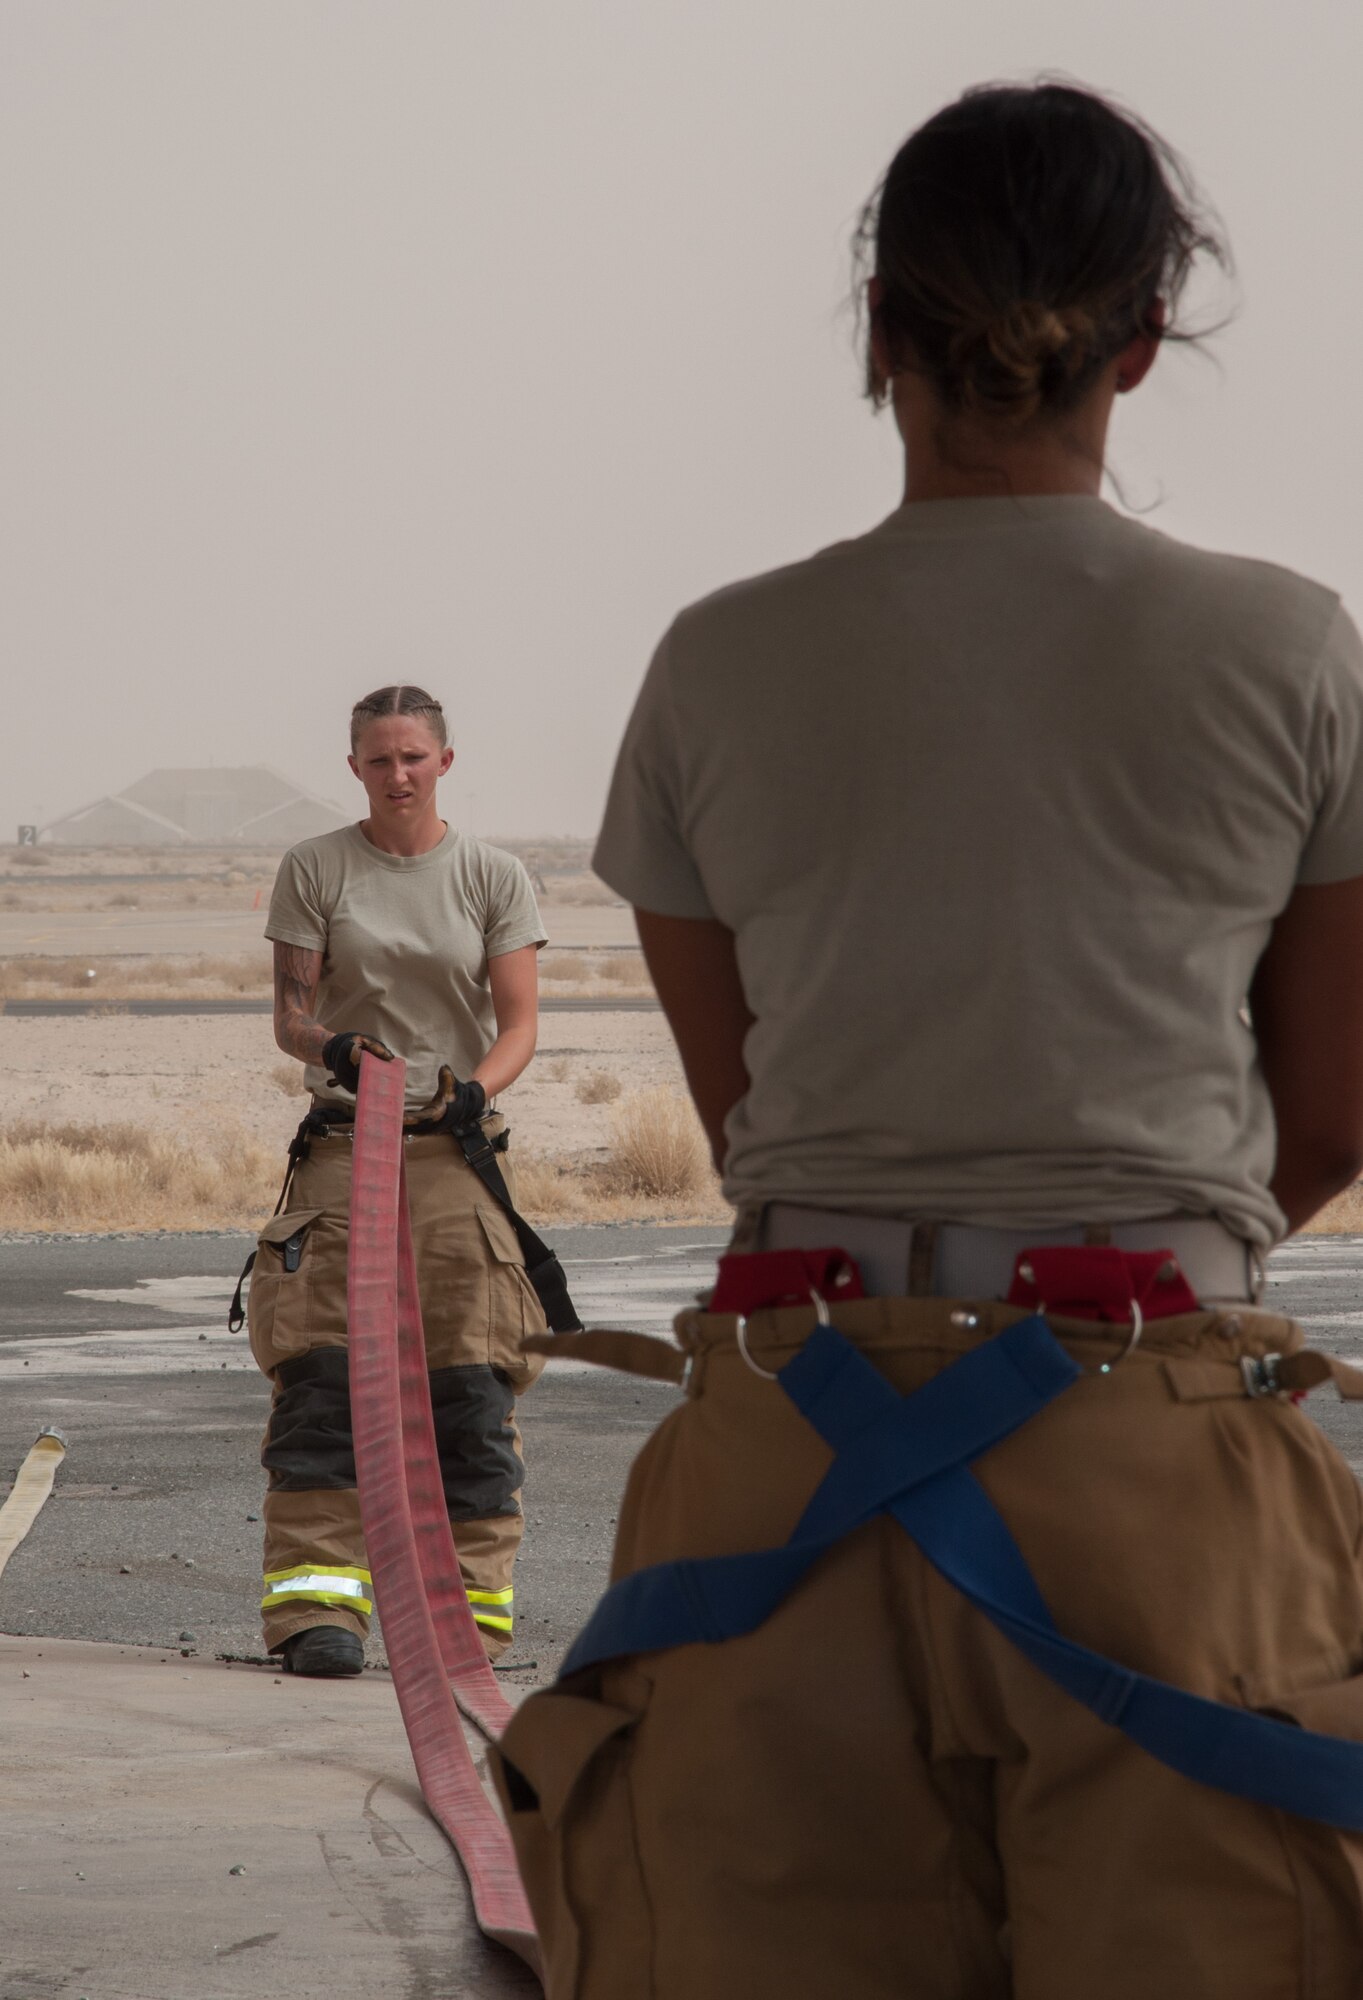 Senior Airman Ashley Eisenbarth (left) stretches out a hose line, with assistance from Staff Sgt. Jessica Mendoza Sunday, June 25, 2017 at a 386th Air Expeditionary Wing fire station at an undisclosed location in Southwest Asia. (U.S. Air Force photo by Master Sgt. Eric M. Sharman)